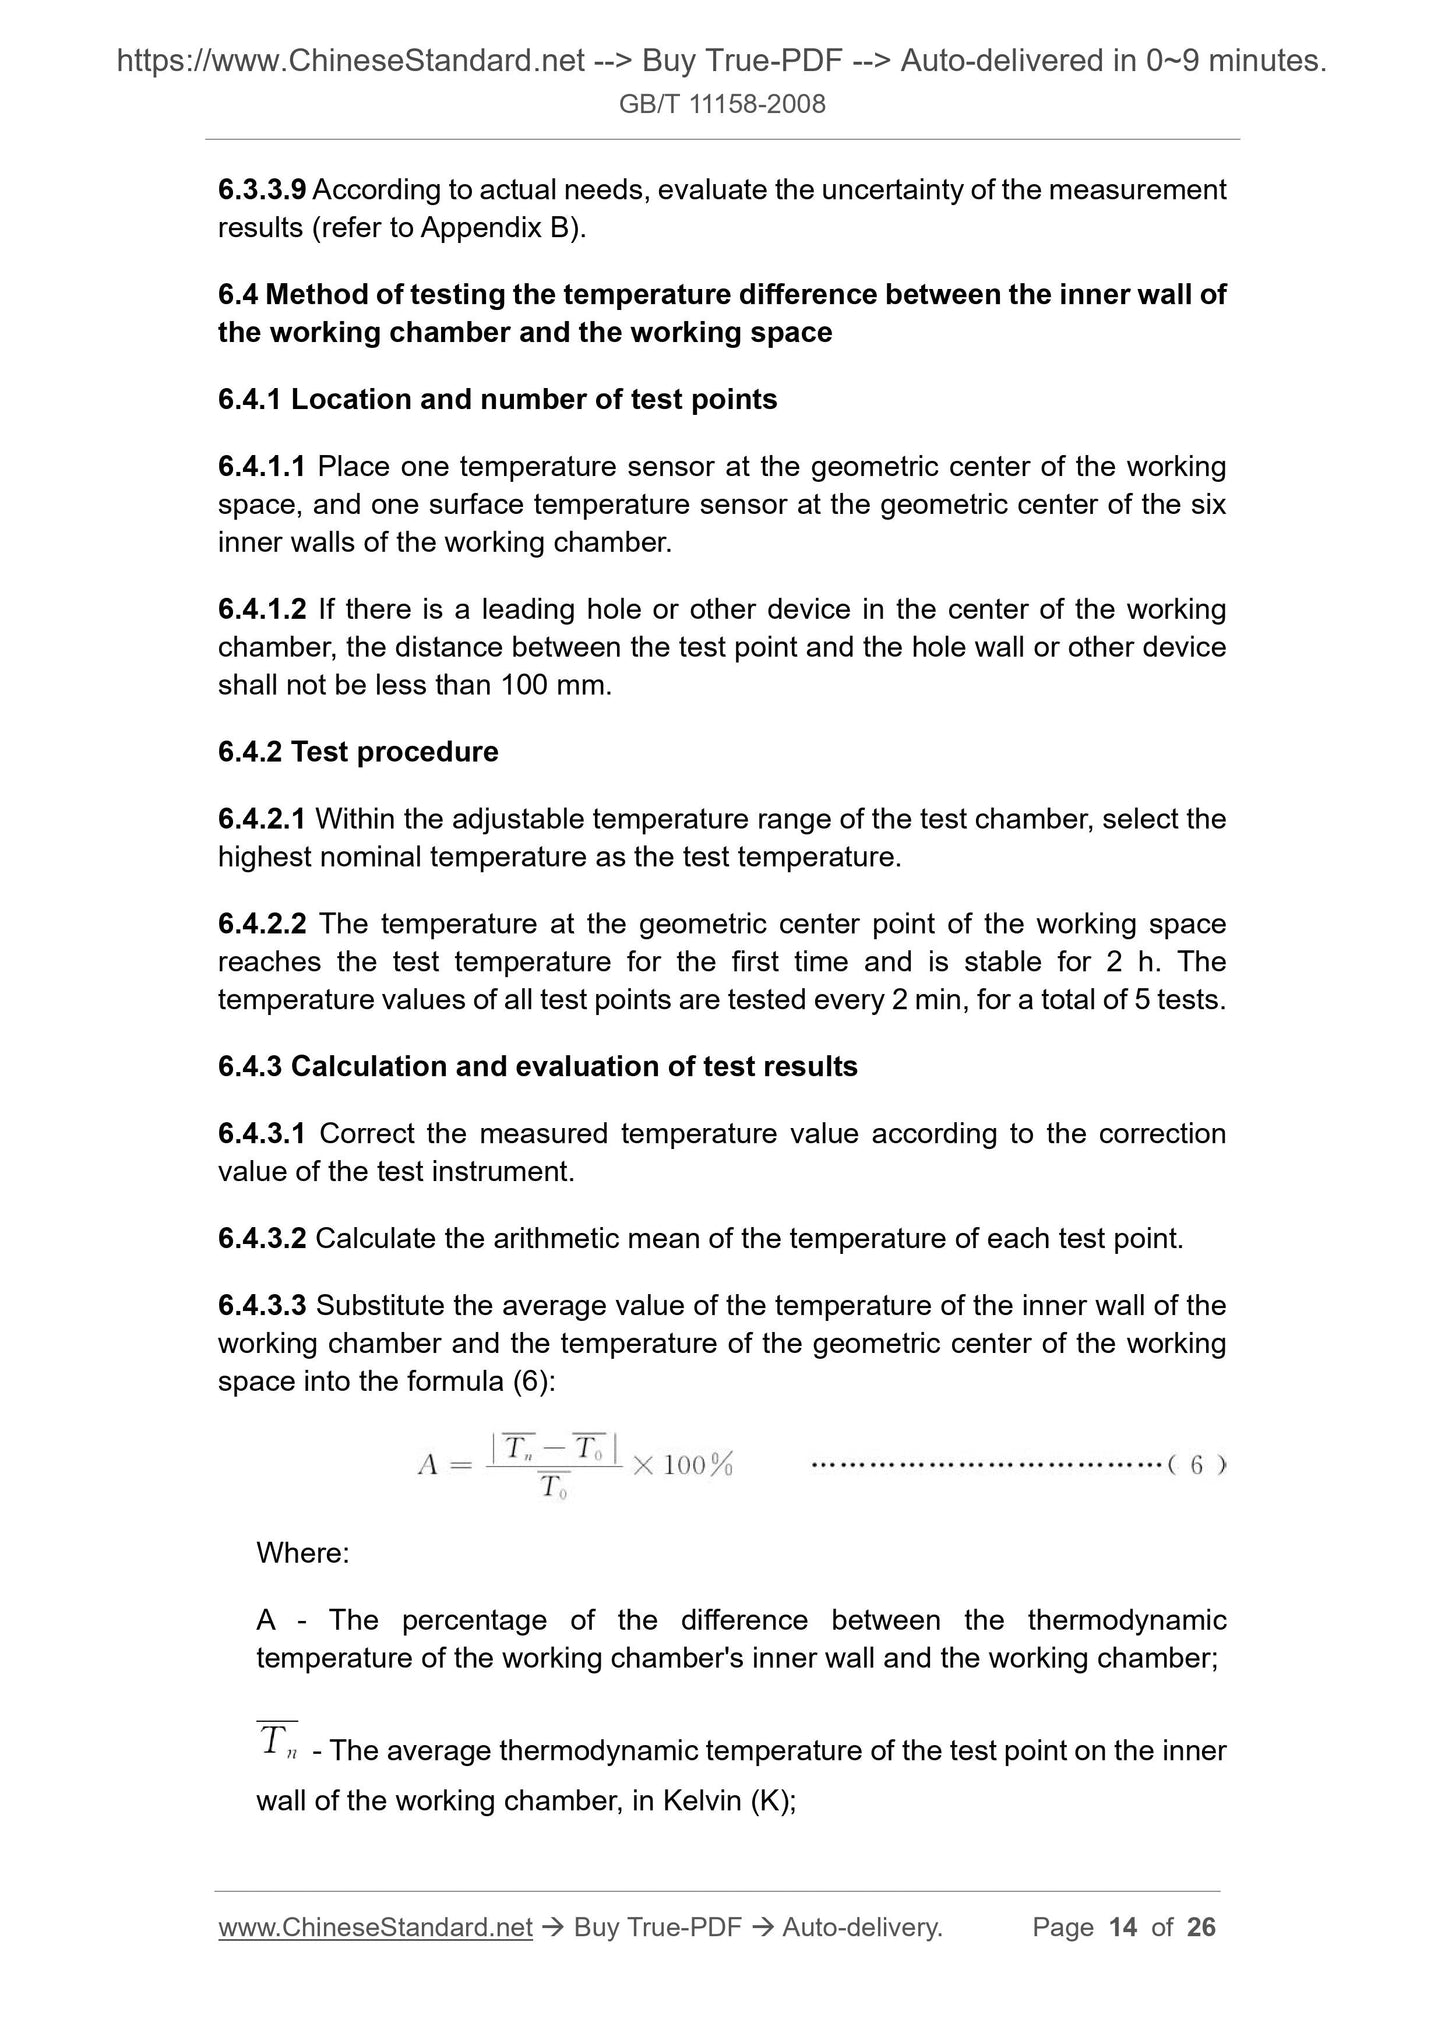 GB/T 11158-2008 Page 6